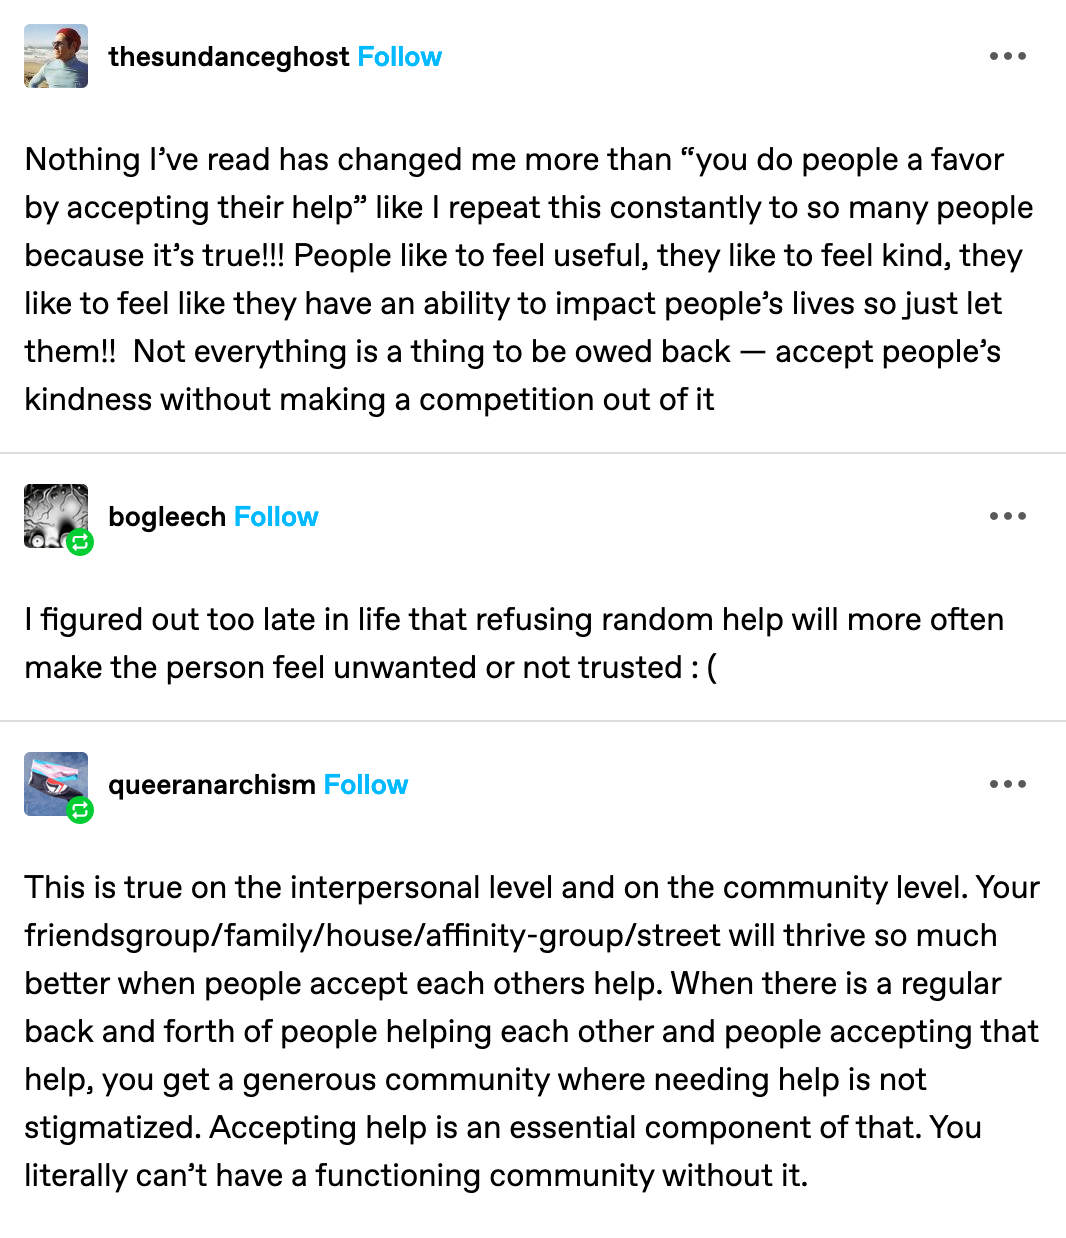  from tumblr user: thesundanceghost:  Nothing I’ve read has changed me more than “you do people a favor by accepting their help” like I repeat this constantly to so many people because it’s true!!! People like to feel useful, they like to feel kind, they like to feel like they have an ability to impact people’s lives so just let them!! Not everything is a thing to be owed back — accept people’s kindness without making a competition out of it  (below that) from tumblr user bogleech:  I figured out too late in life that refusing random help will more often make the person feel unwanted or not trusted : (   (below that) from tumblr user queeranarchism:  This is true on the interpersonal level and on the community level. Your friendsgroup/family/house/affinity-group/street will thrive so much better when people accept each others help. When there is a regular back and forth of people helping each other and people accepting that help, you get a generous community where needing help is not stigmatized. Accepting help is an essential component of that. You literally can’t have a functioning community without it.